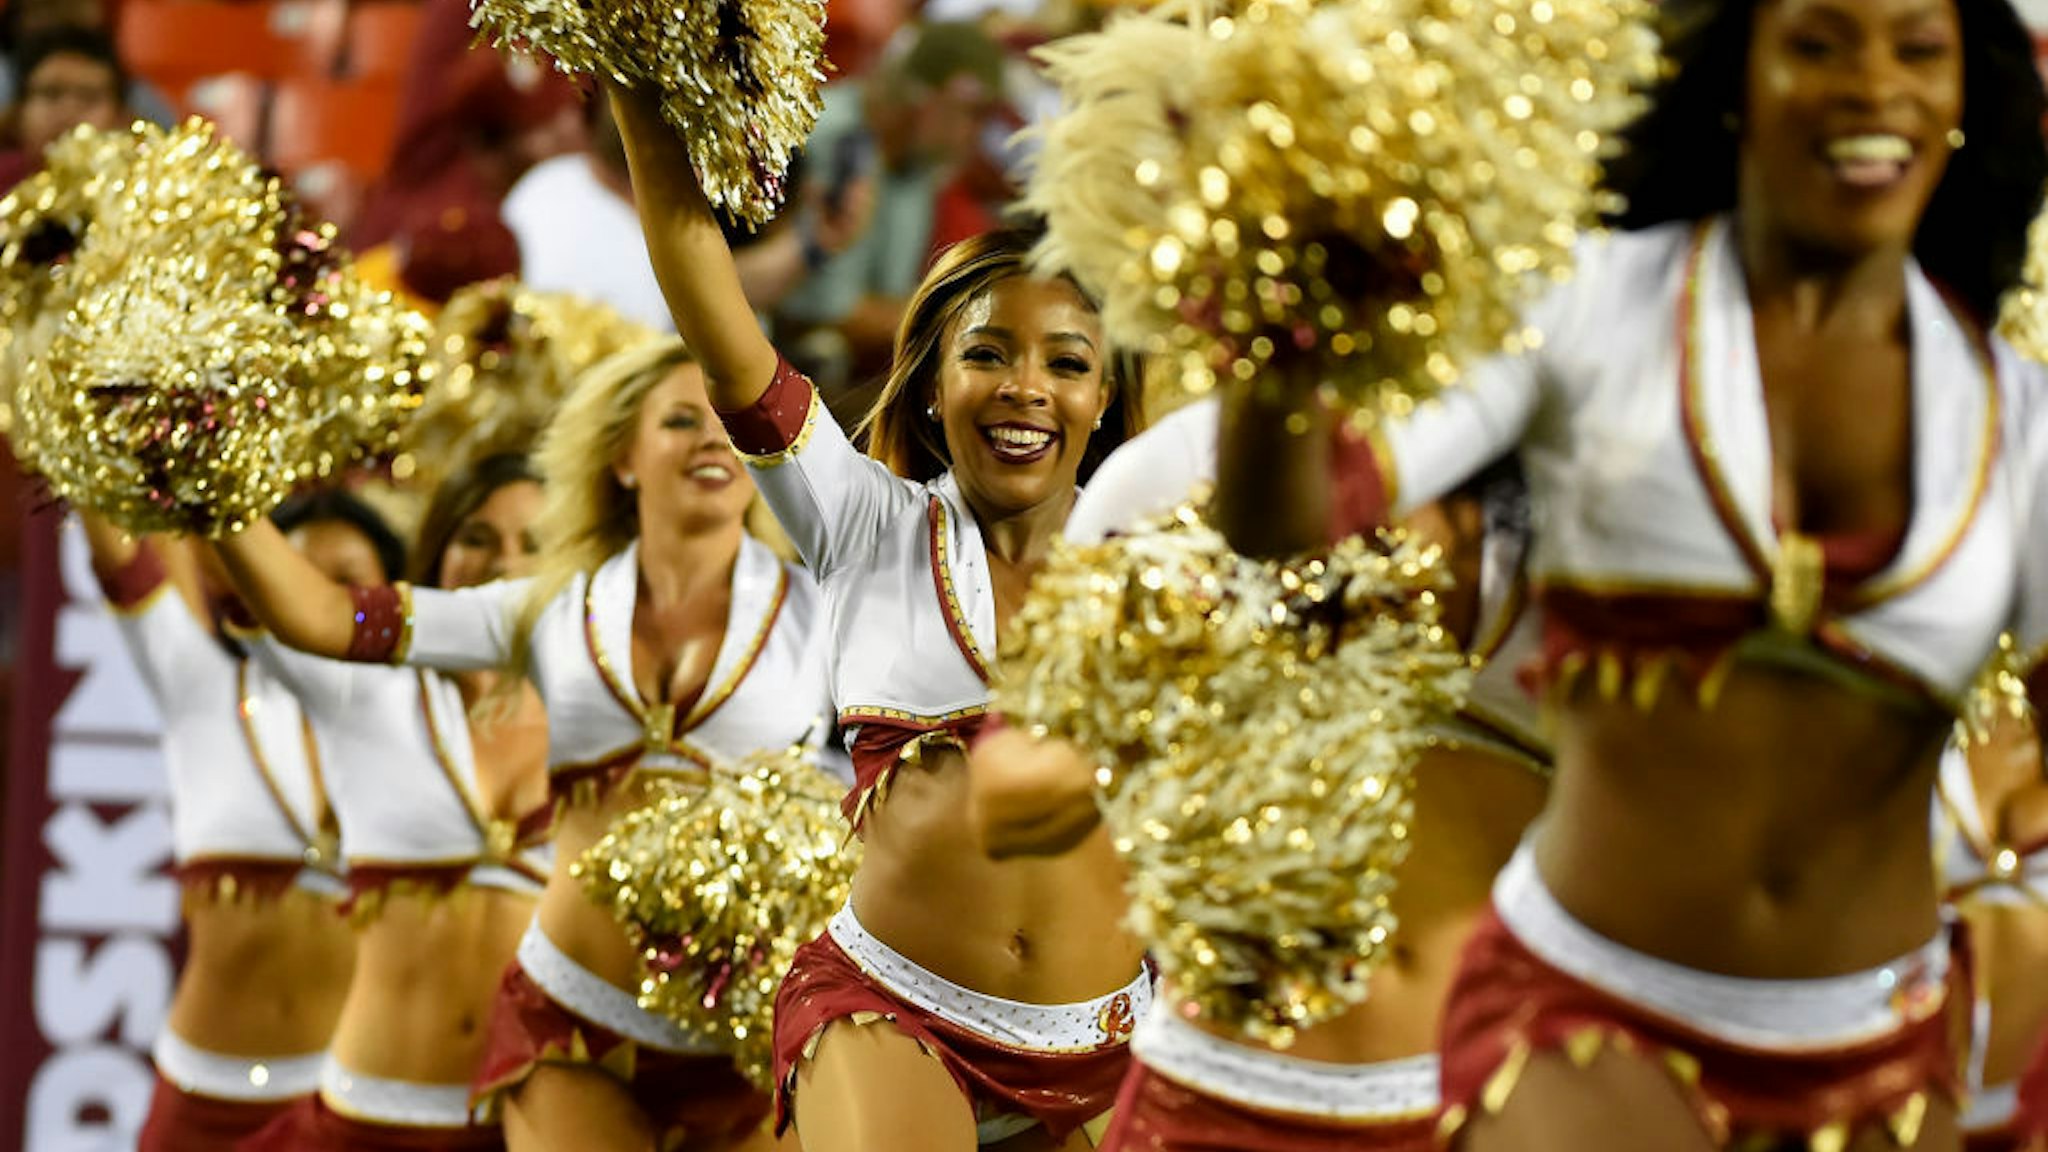 Washington Redskins cheerleaders run on to the field prior to the game against the Chicago Bears at FedExField on September 23, 2019 in Landover, Maryland. (Photo by Will Newton/Getty Images)